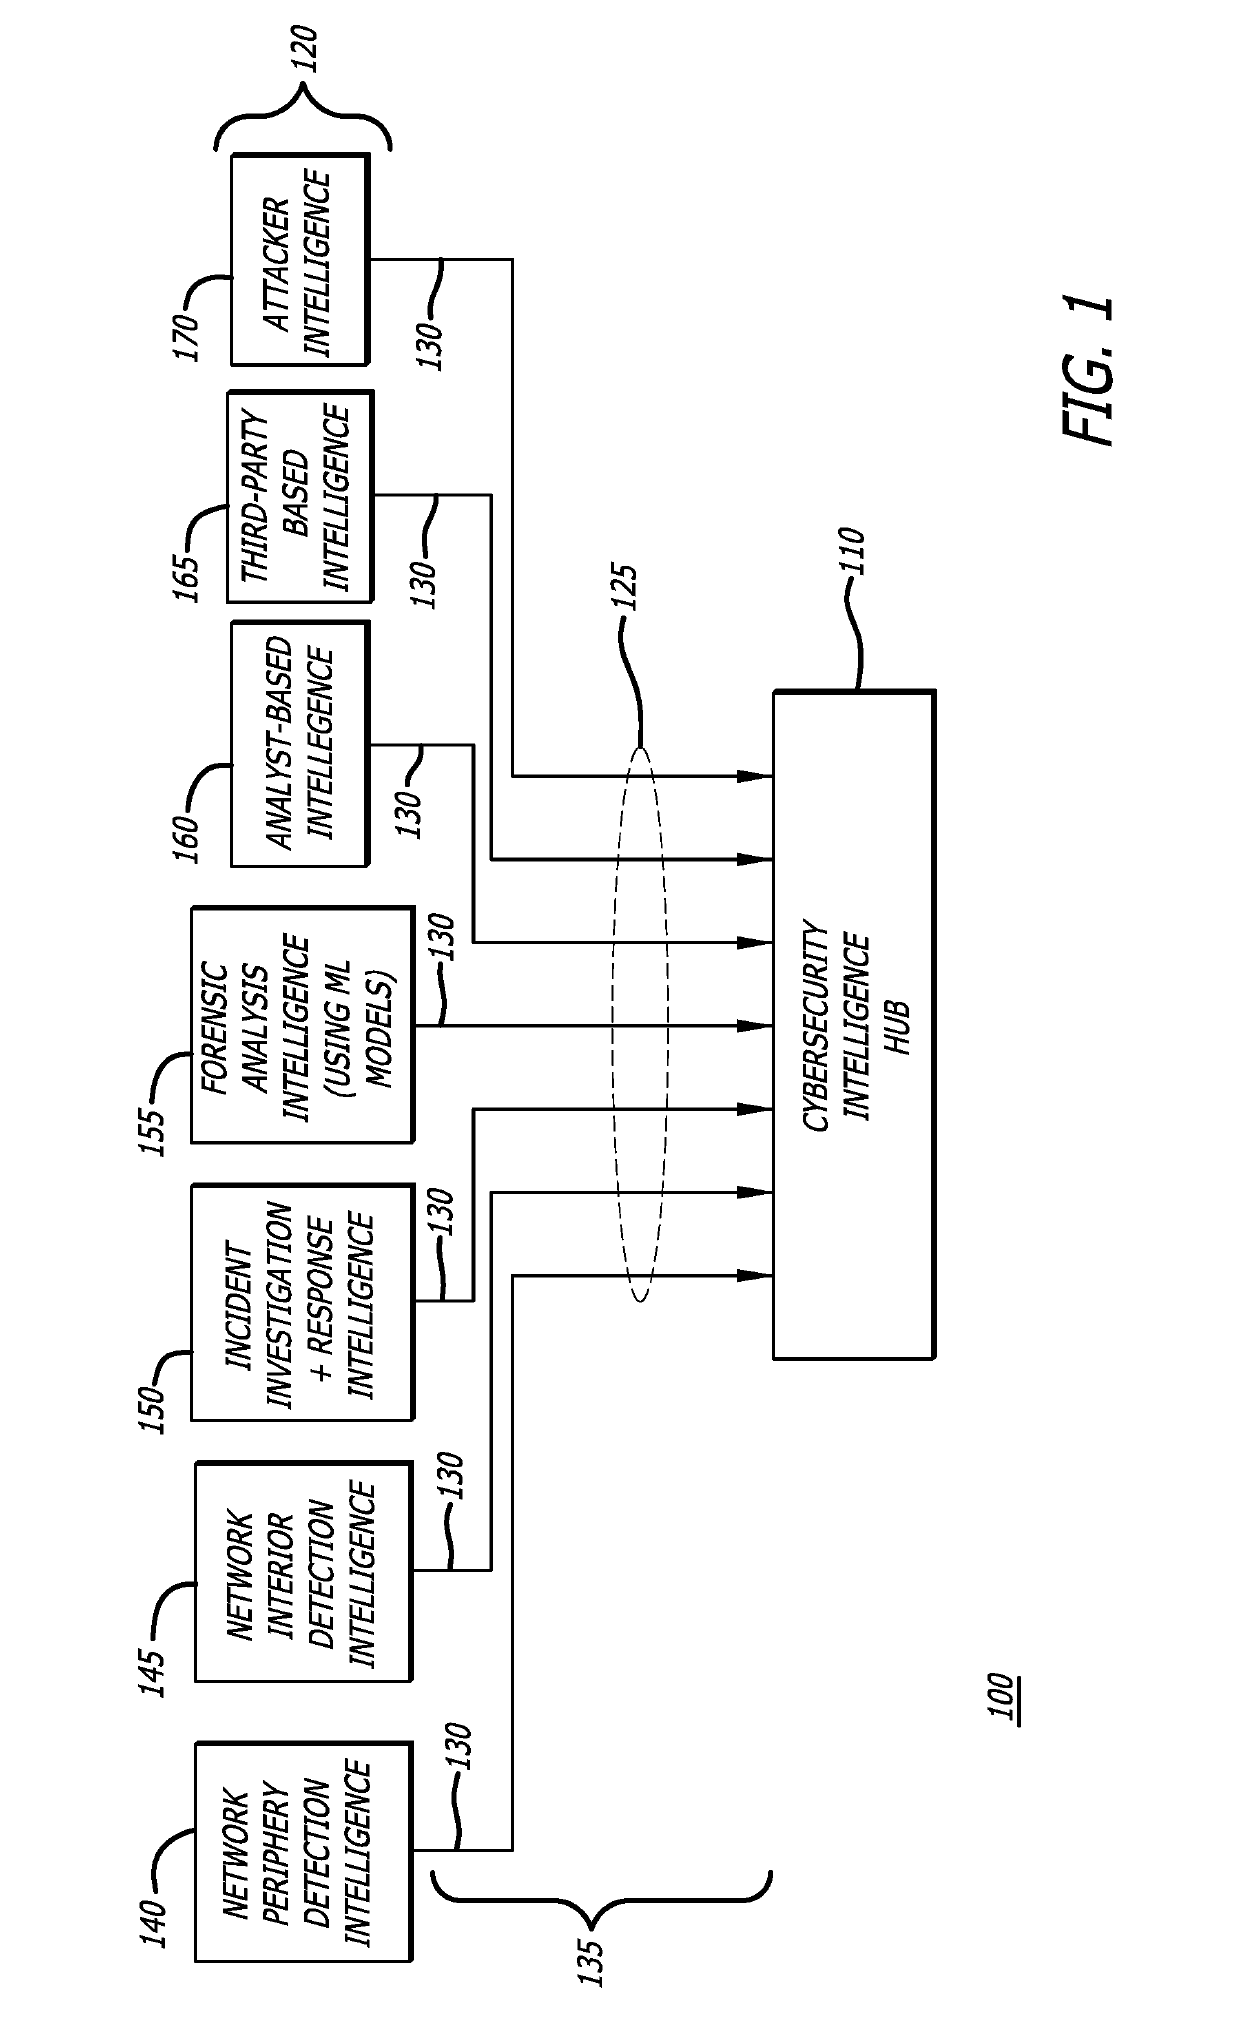 Platform and Method for Enhanced Cyber-Attack Detection and Response Employing a Global Data Store